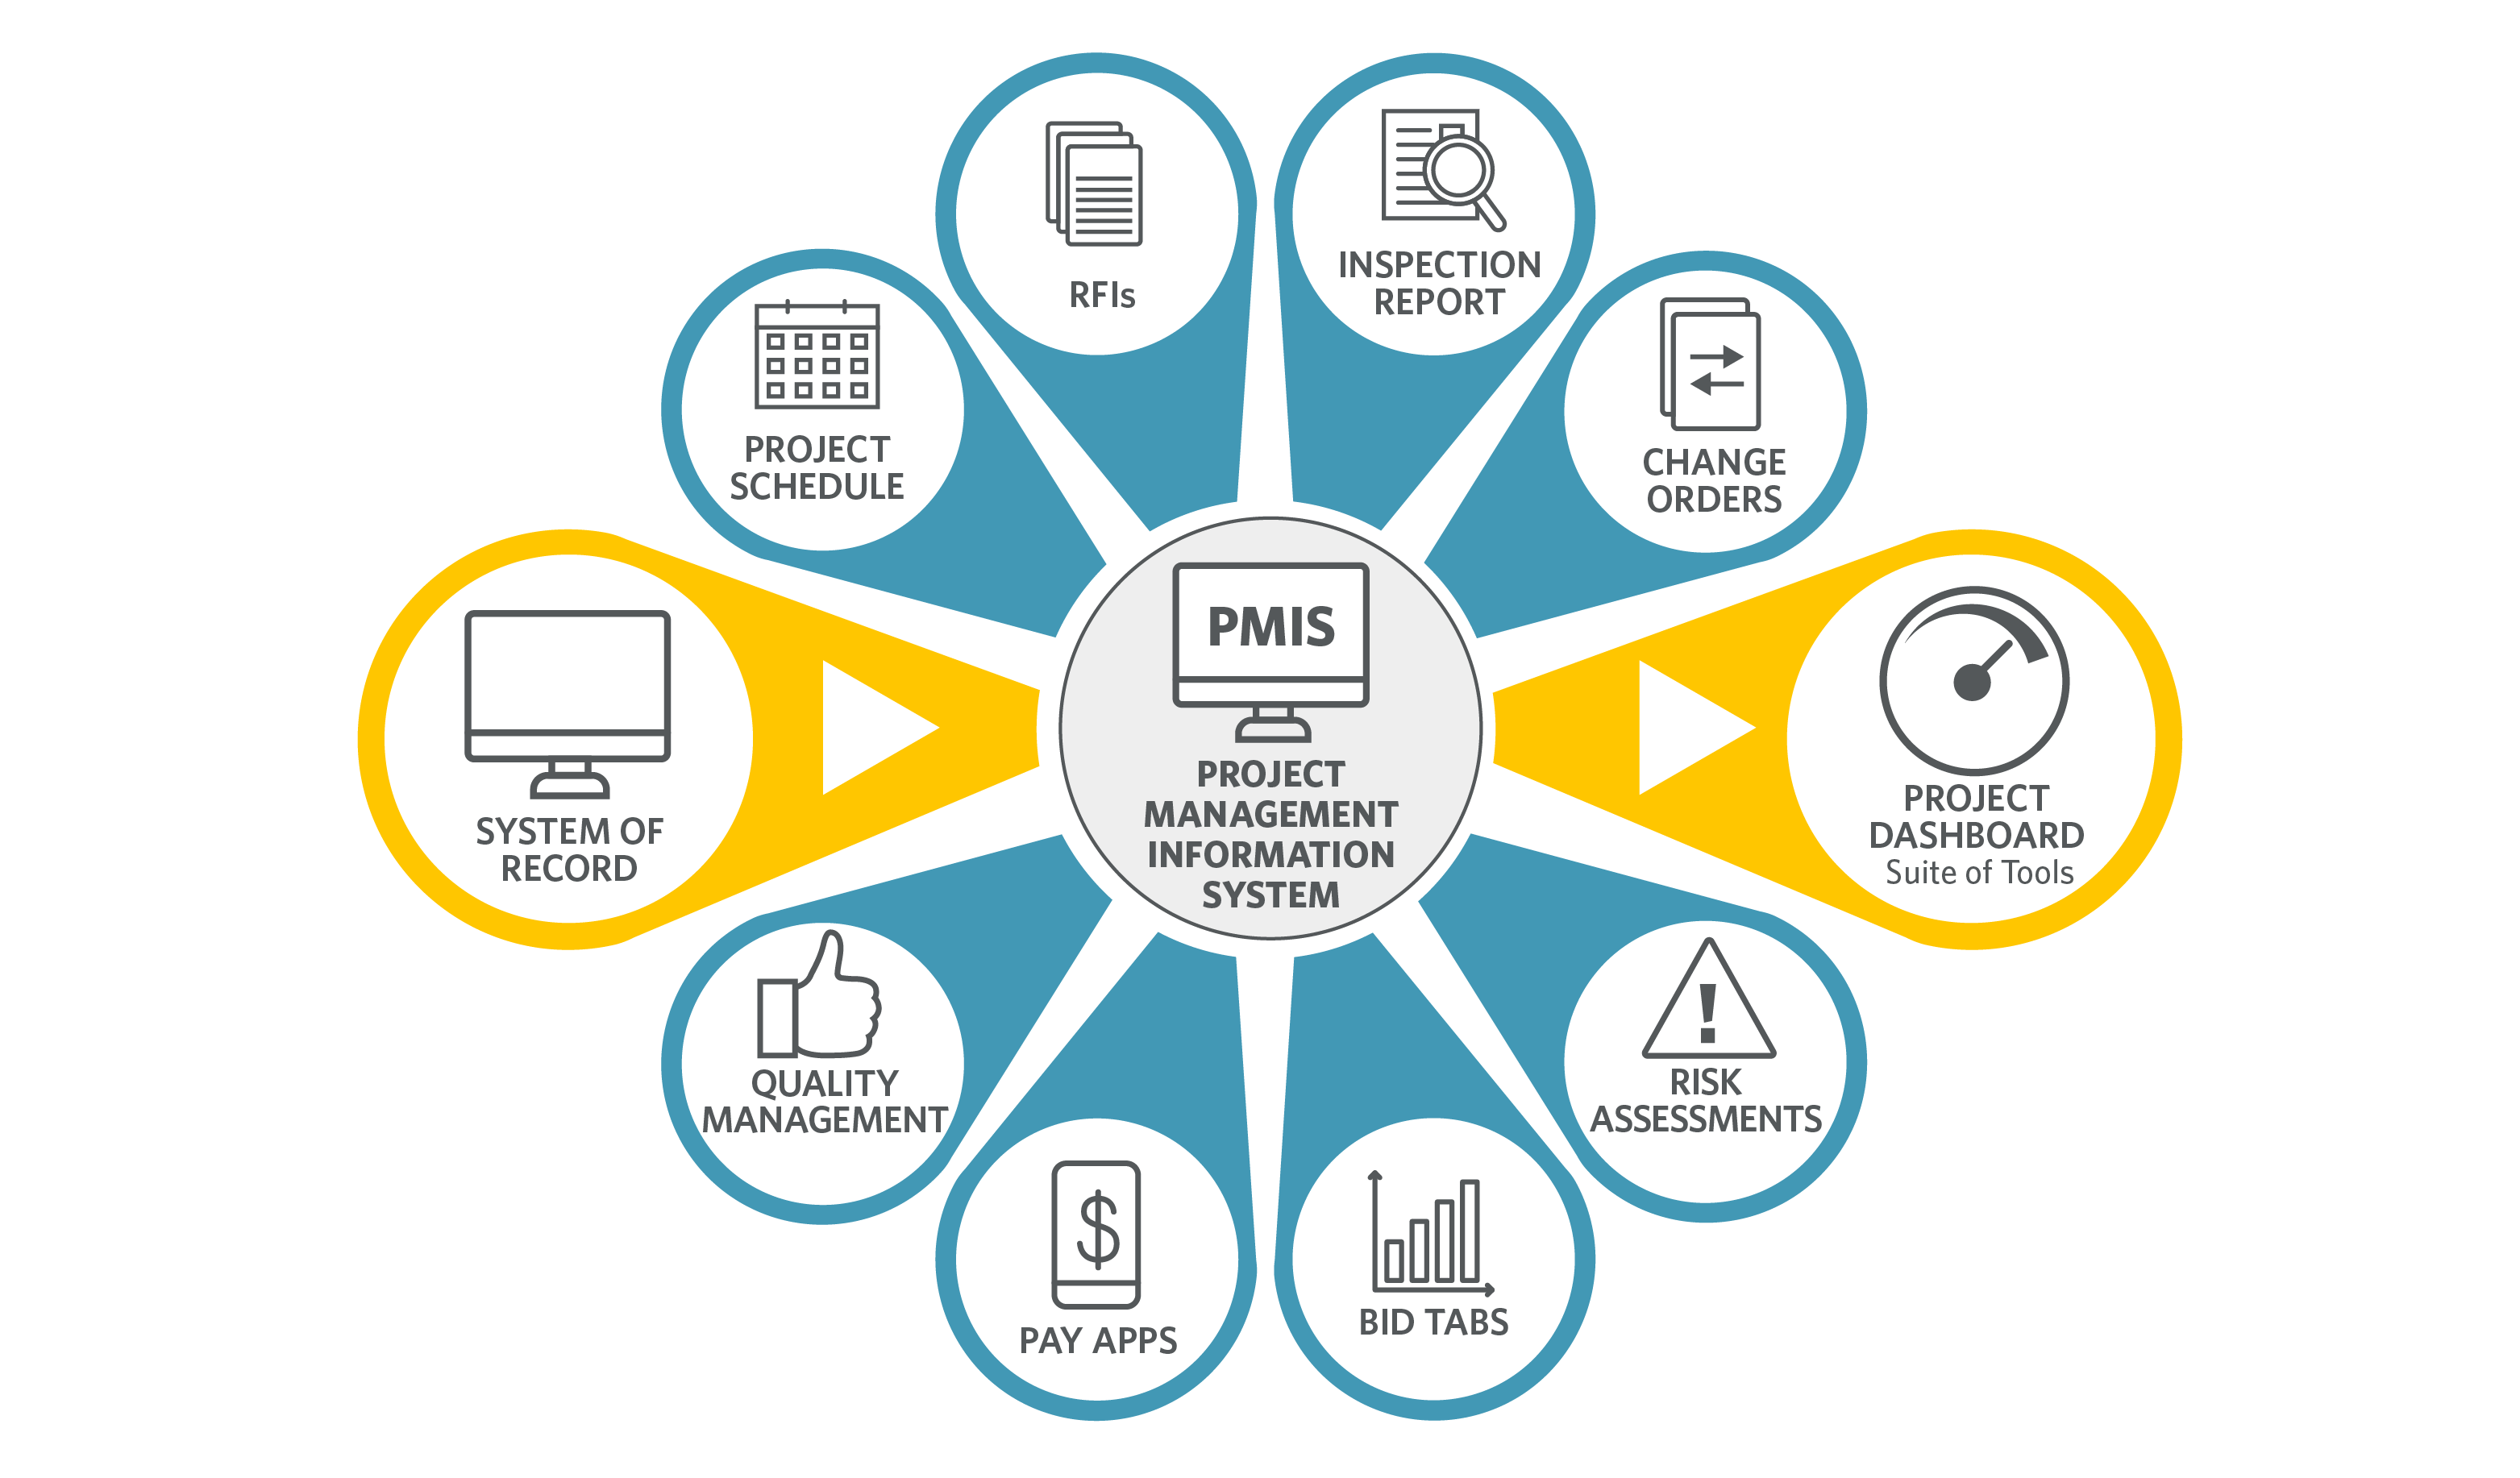 illustration showing many components feeding into PMIS and making dashboards possible